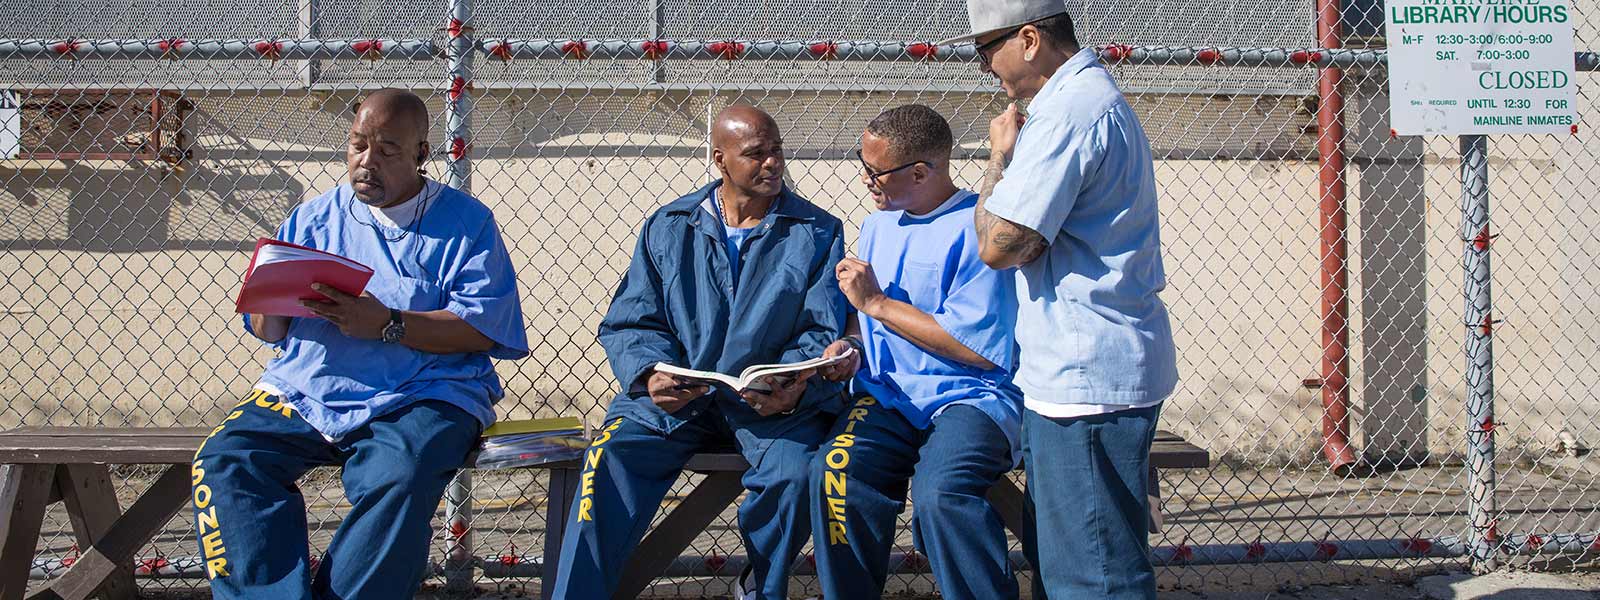 Mt. Tam students studying in the yard at San Quentin State Prison